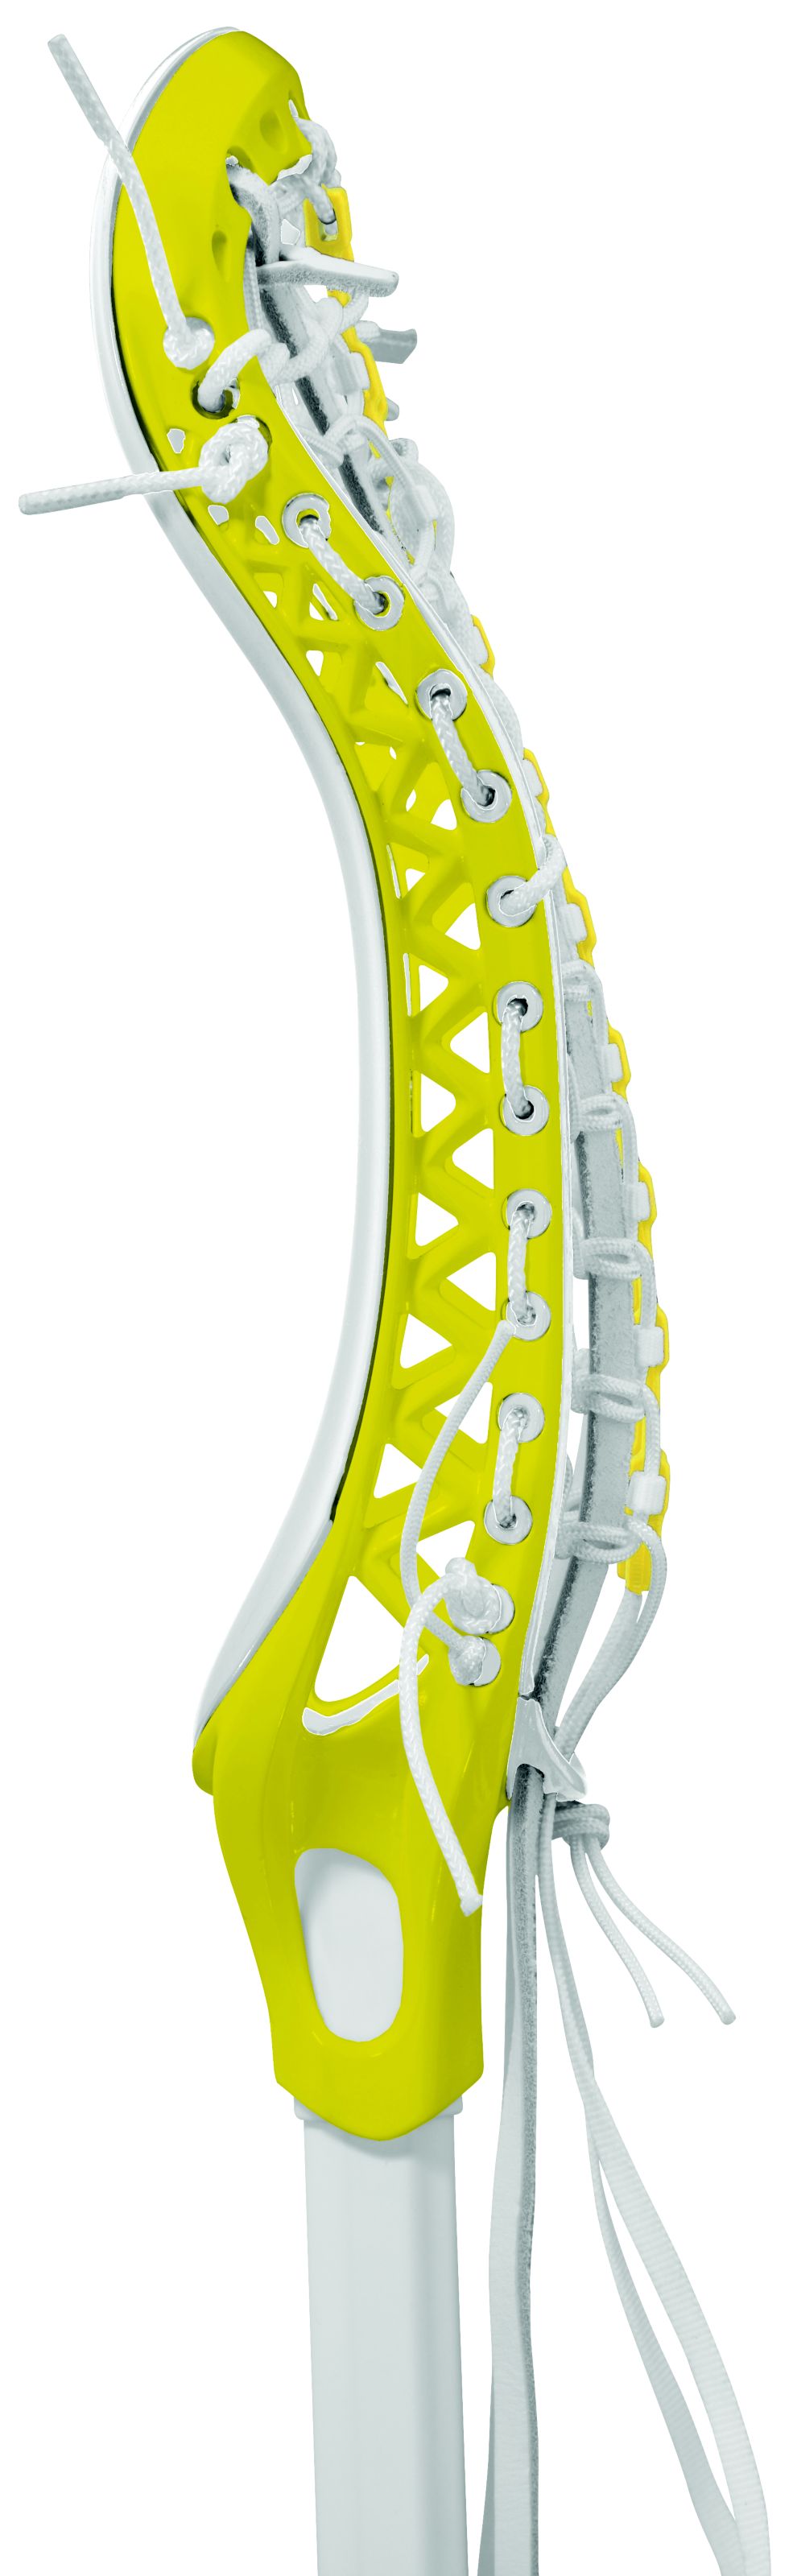 Mantra 2 Strung, Yellow with White image number 2